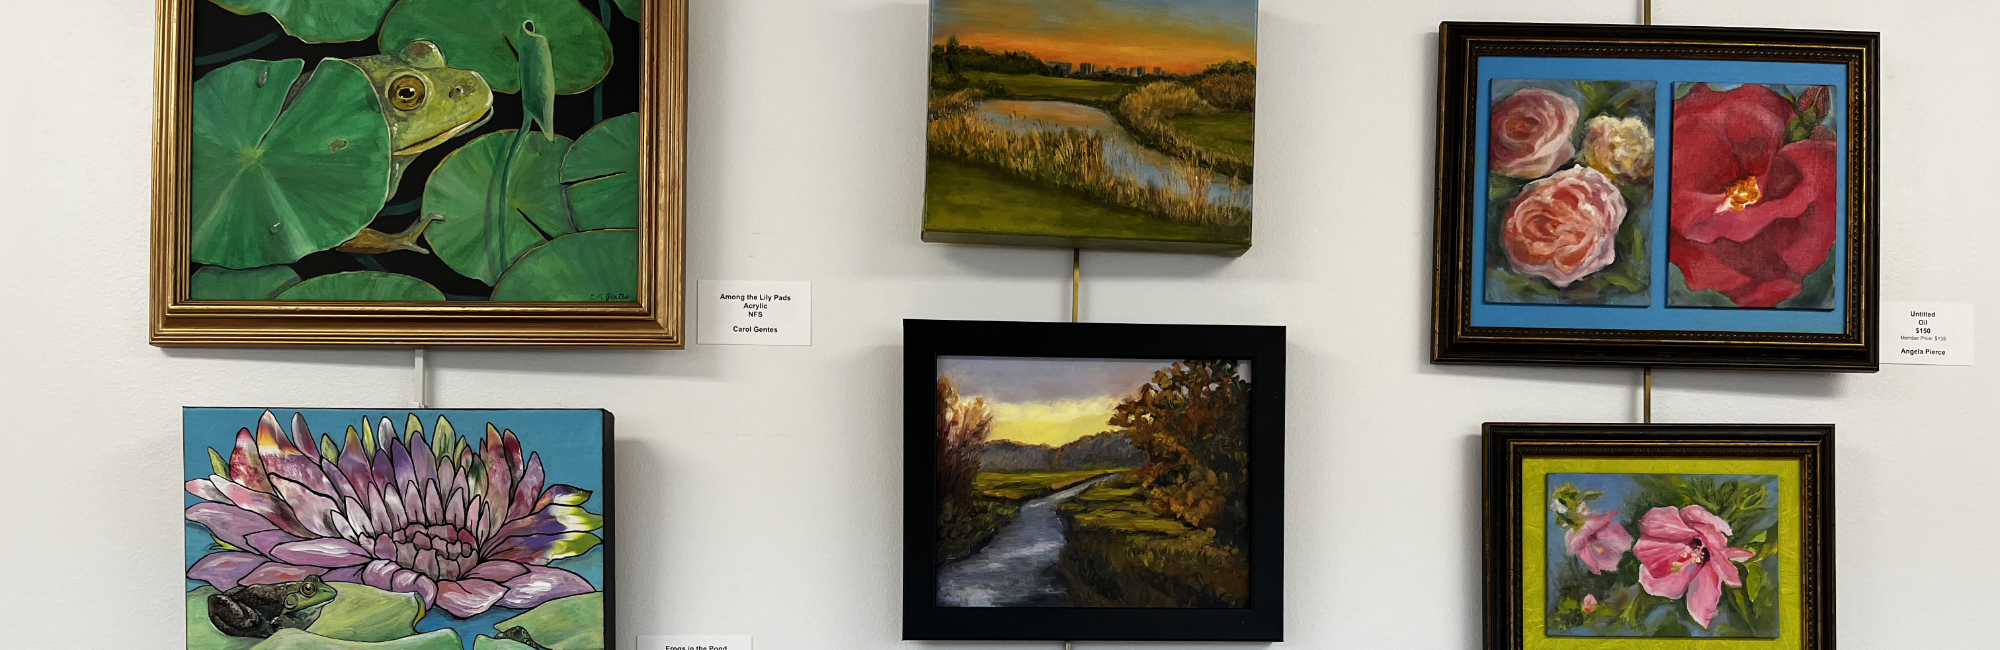 Featured in Studio E / "Nature as We See It", paintings by Carol Gentes & Angela Pierce